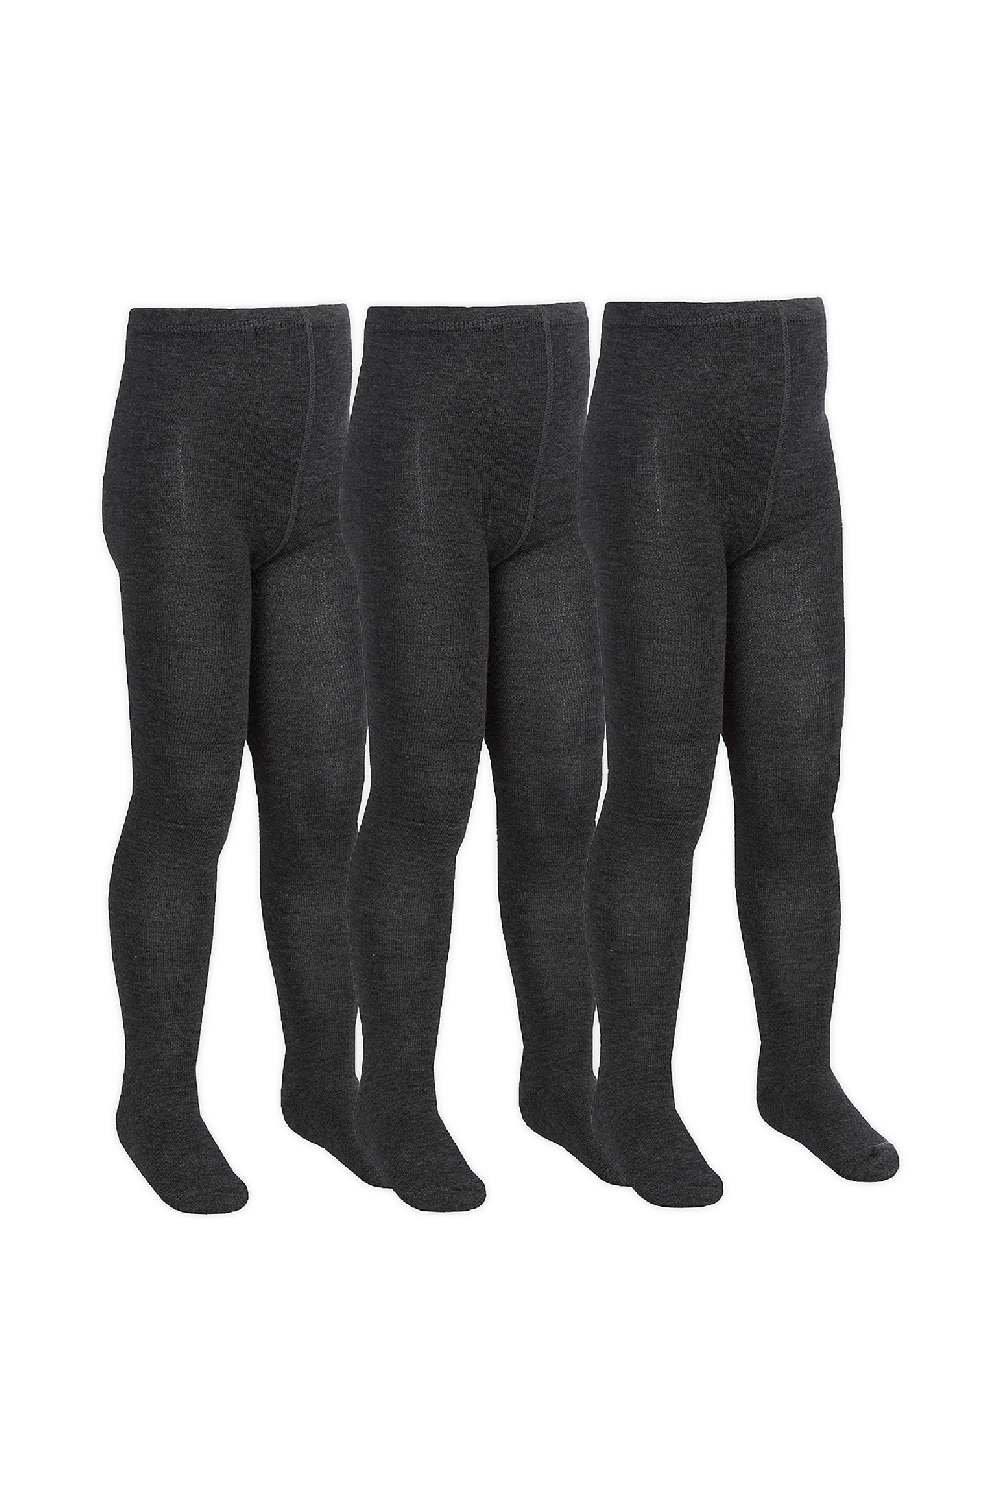 3 Pair Super Soft & Warm Breathable Bamboo School Tights